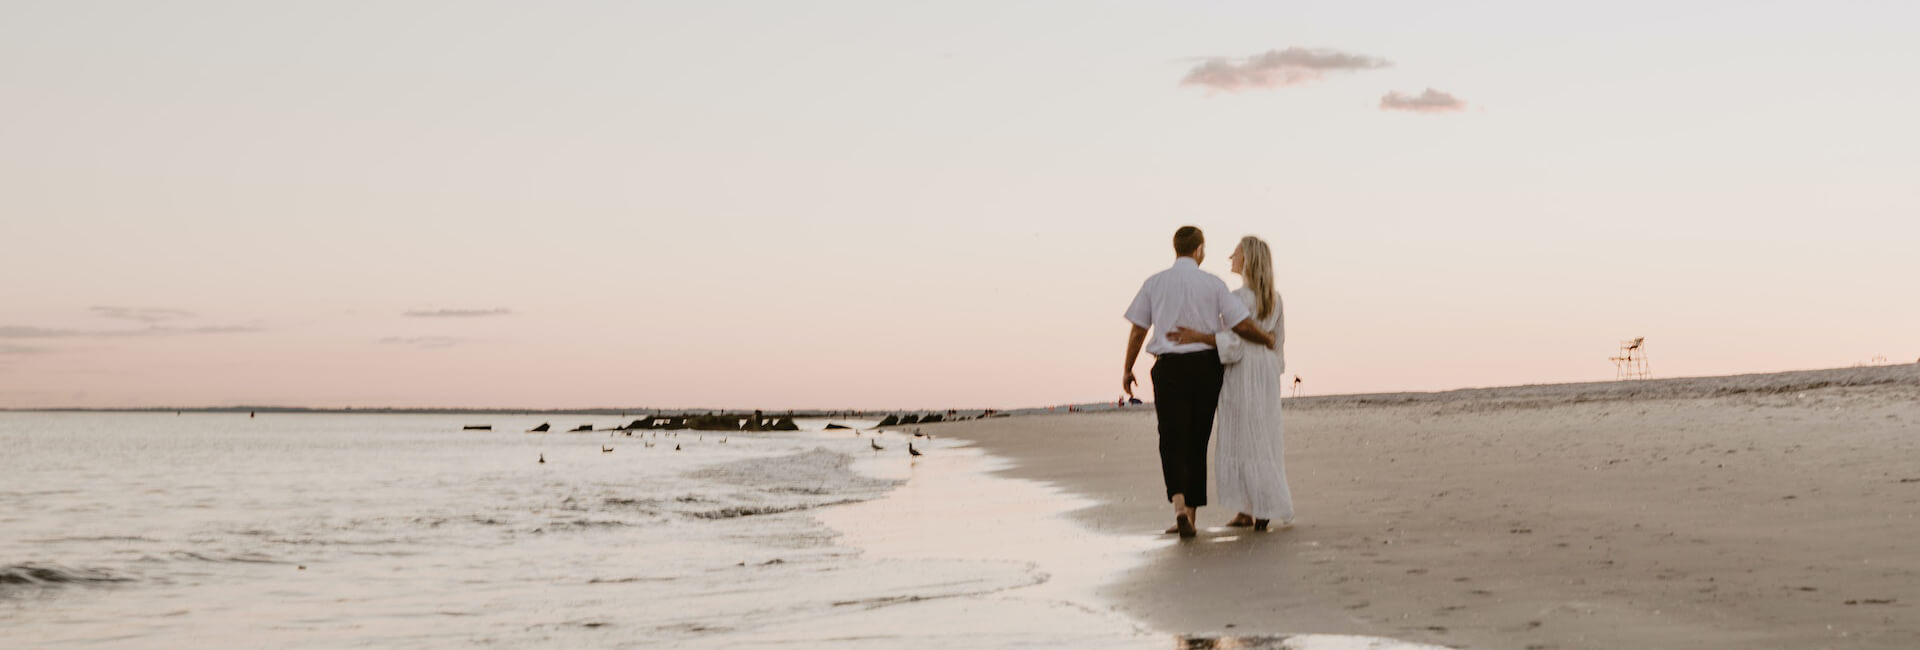 couple walking on the beach in the sunset